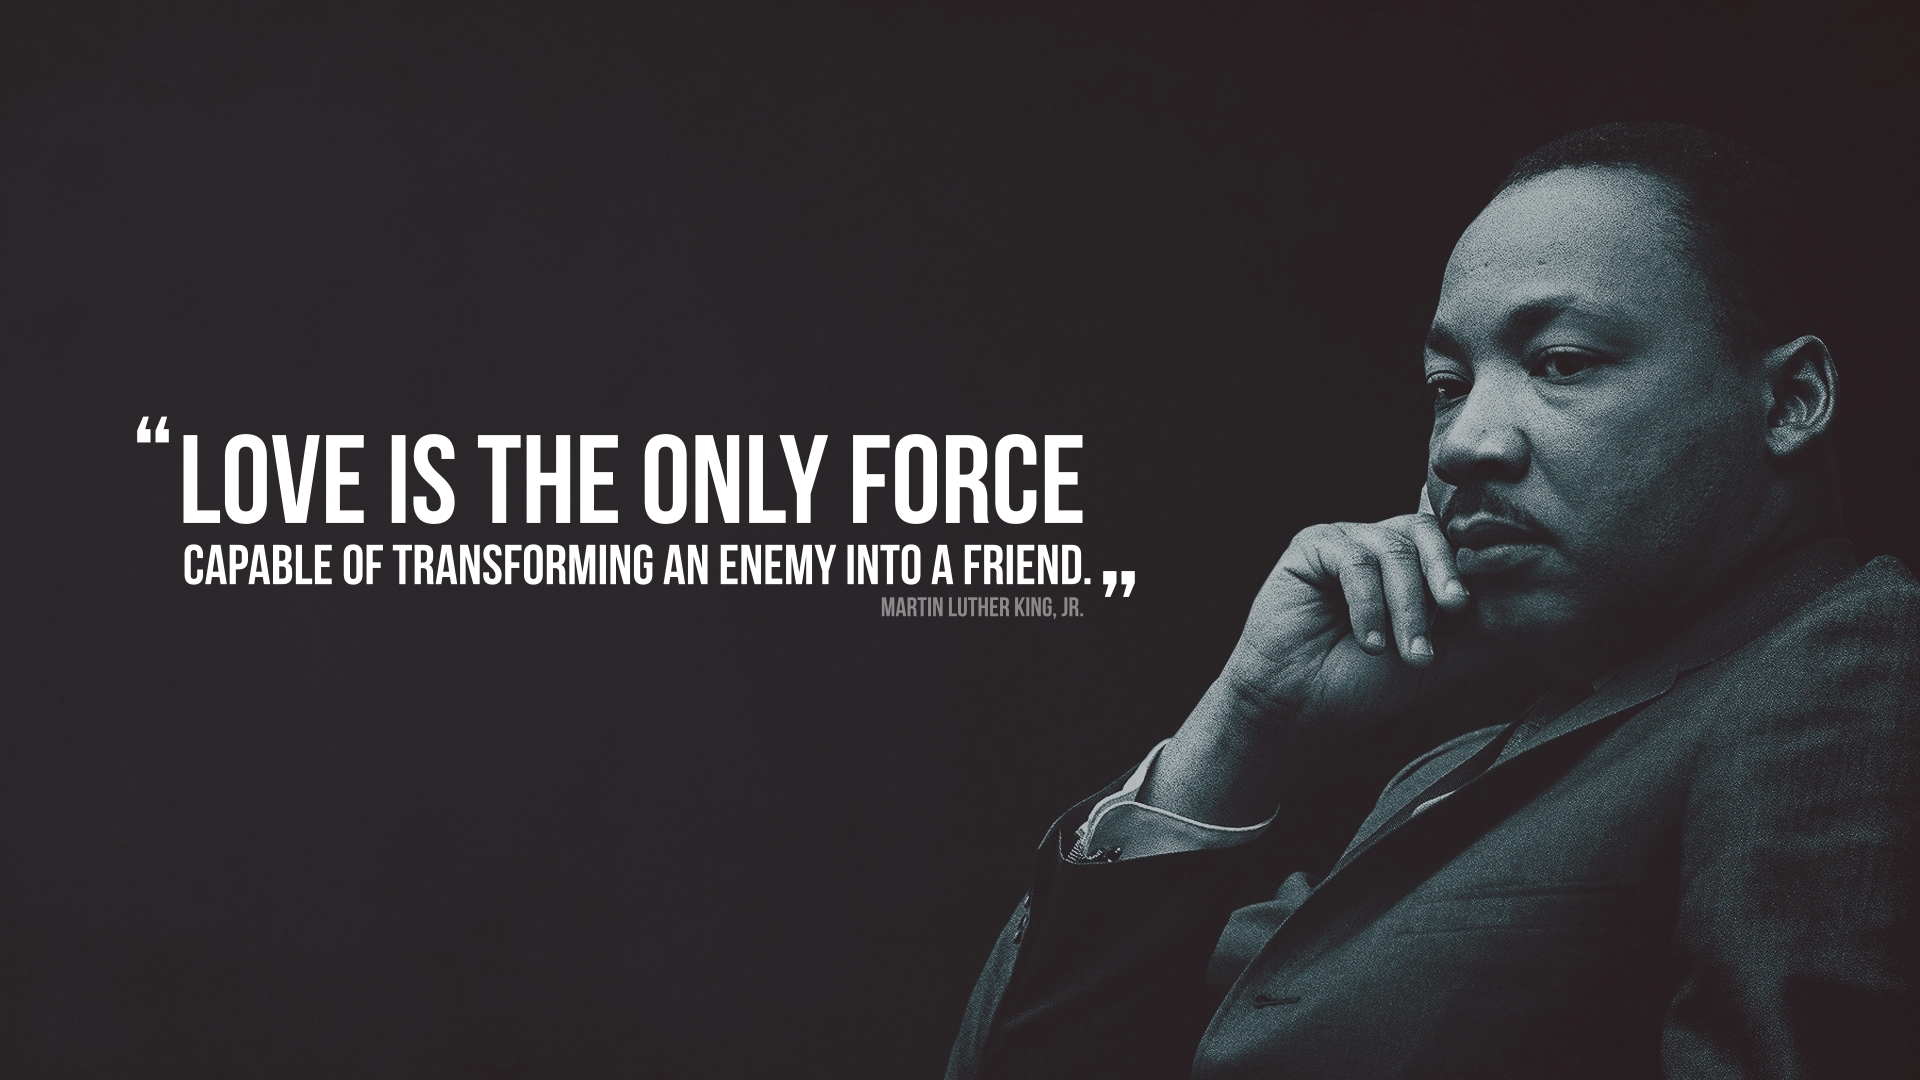 Love is the only force capable of transforming an enemy into a friend. - Martin Luther King, Jr